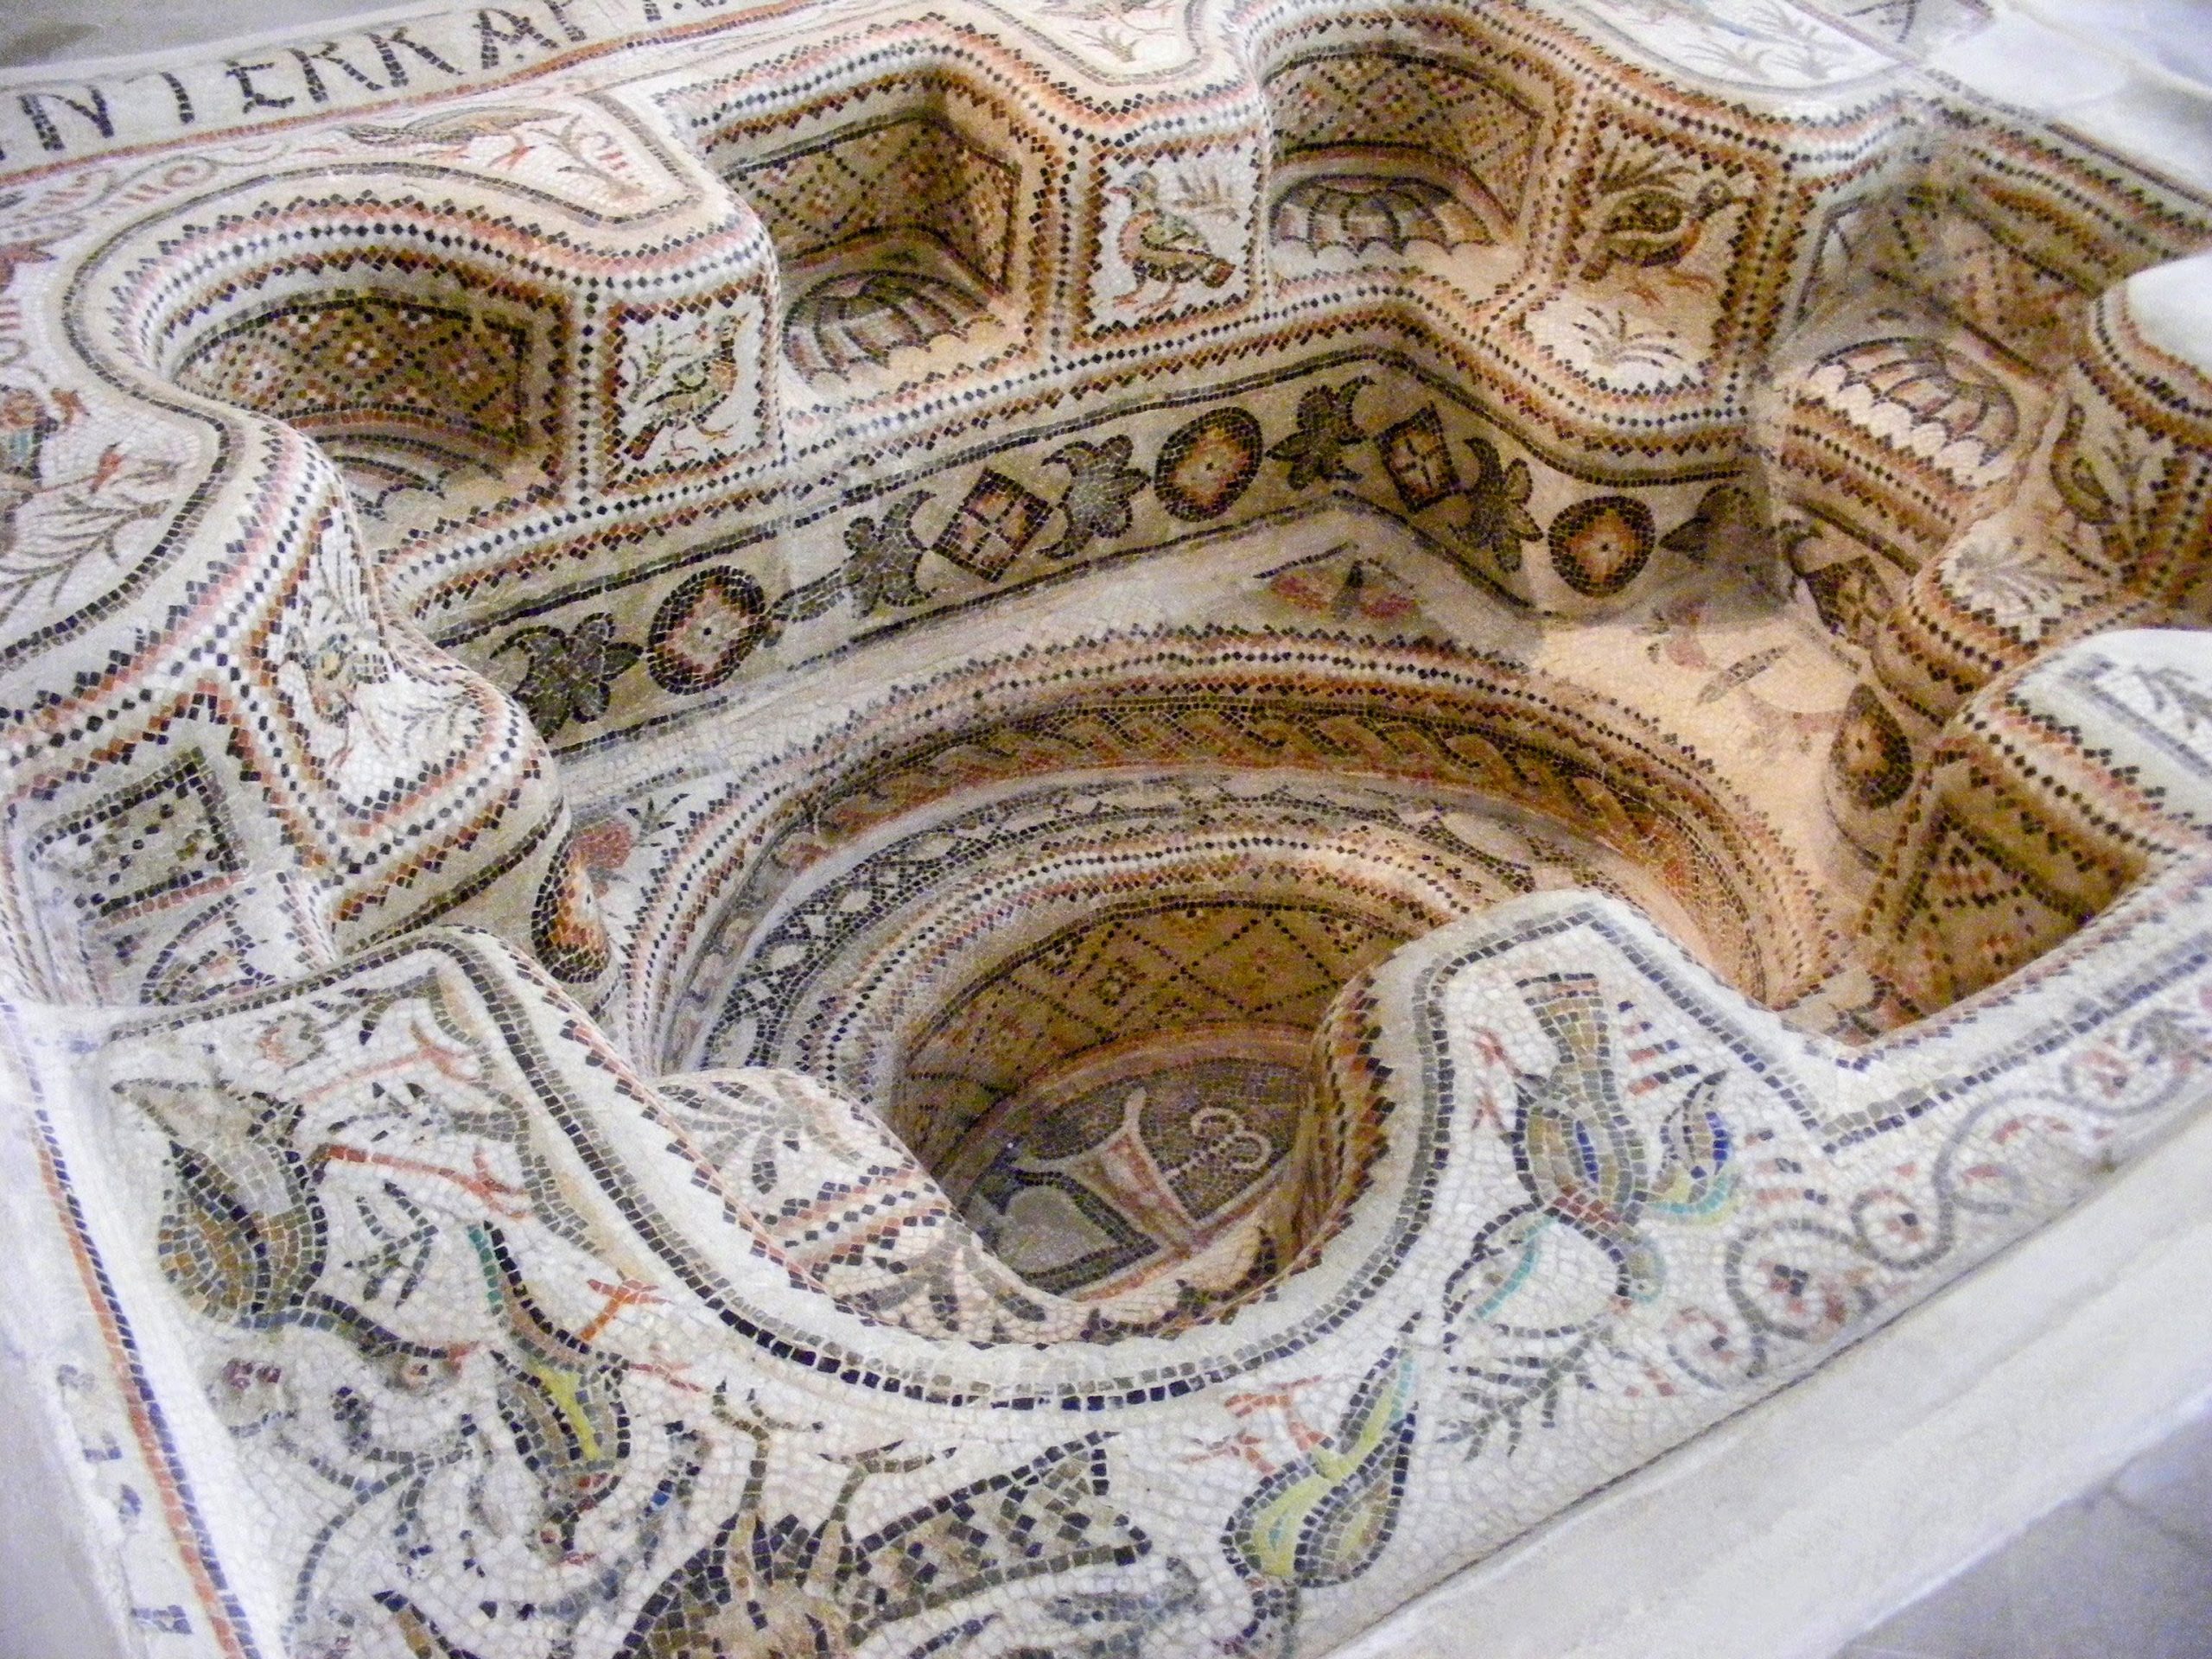 Photo of a 3D mosaic of a baptismal font. There is a deep hole in the middle with seats arranged around it.